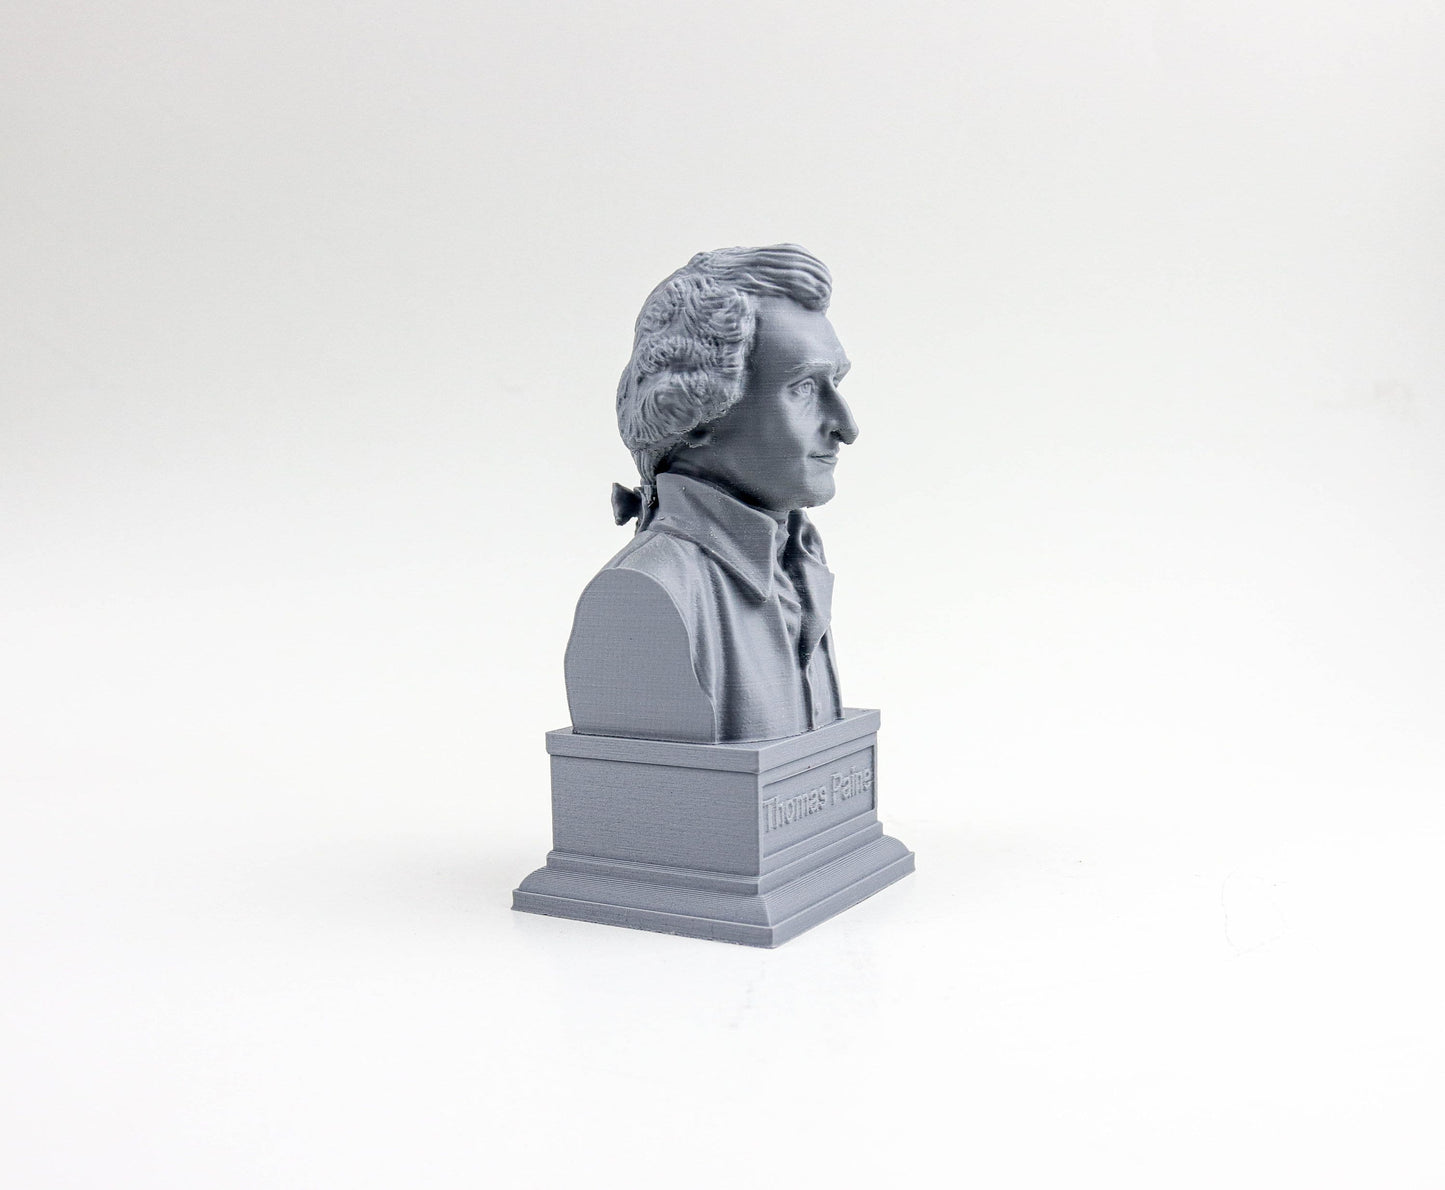 Thomas Paine Bust, American Founding Father, Political Activist, Philosopher